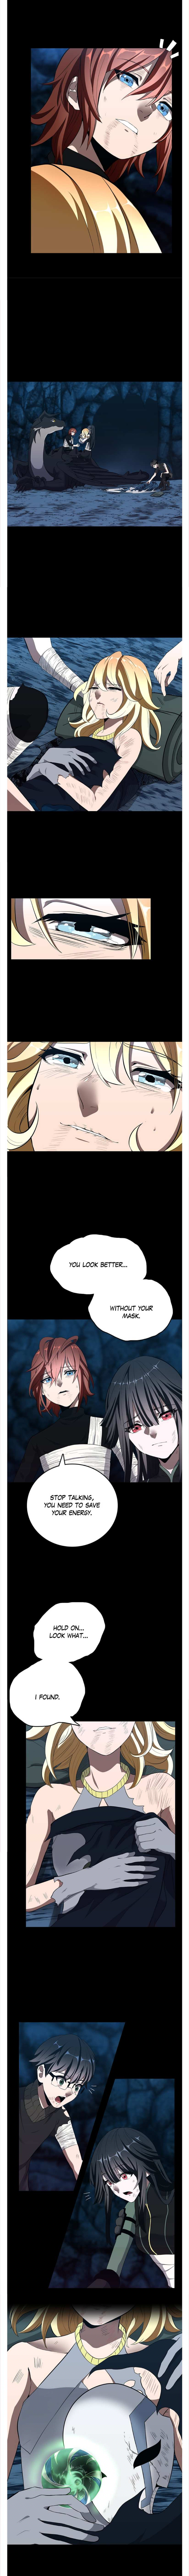 The Beginning After the End - Chapter 71 Page 3